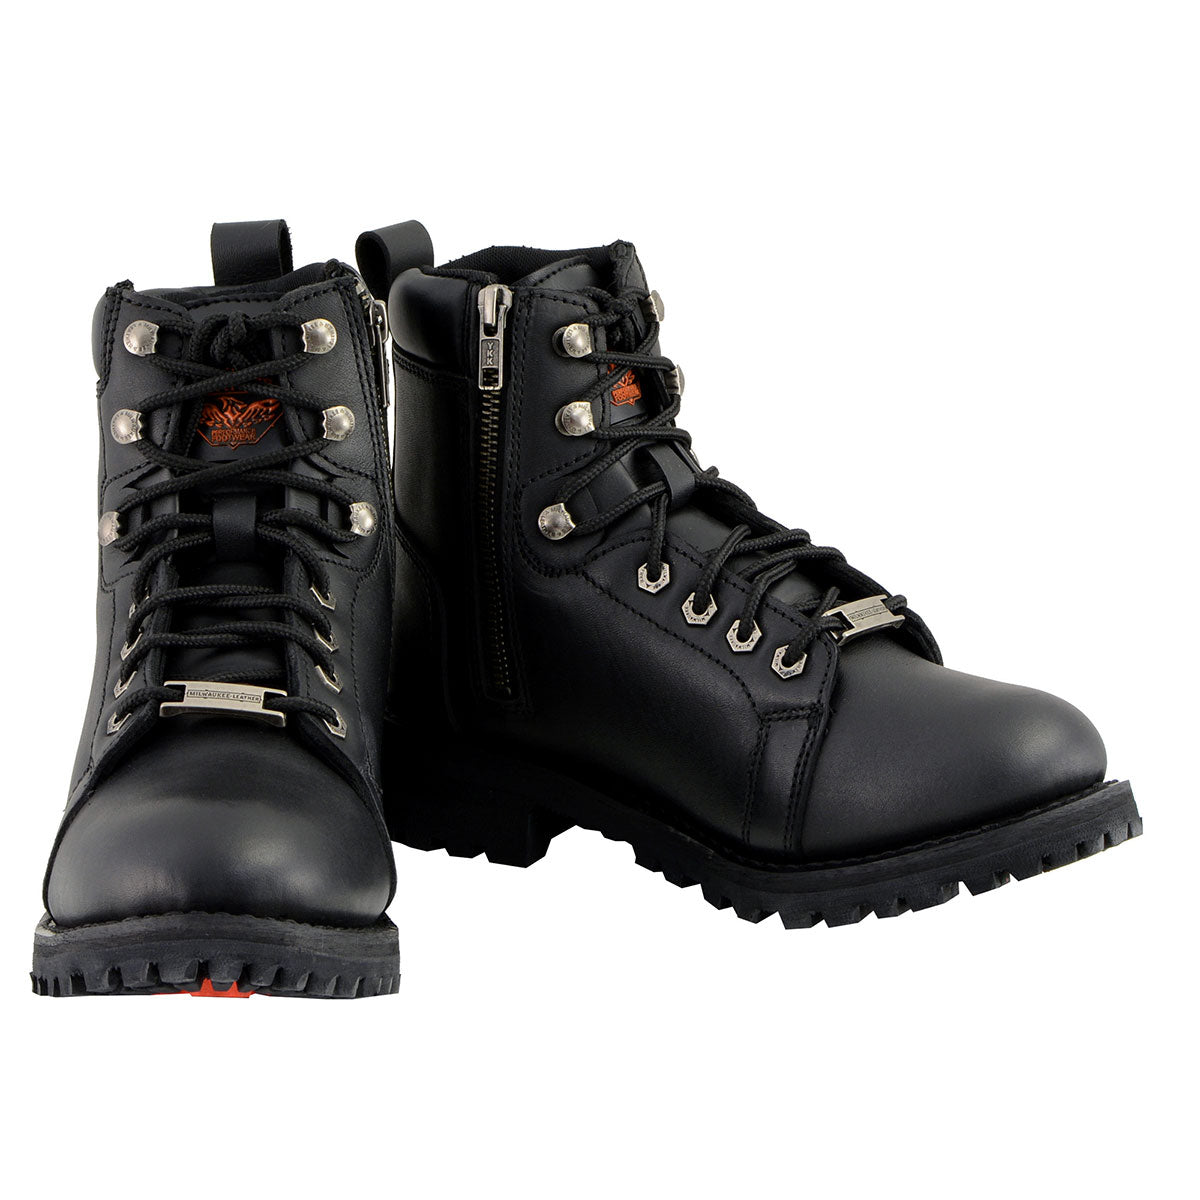 Milwaukee Leather MBL200 Women's Black Leather Lace-Up Boots with Side Zipper